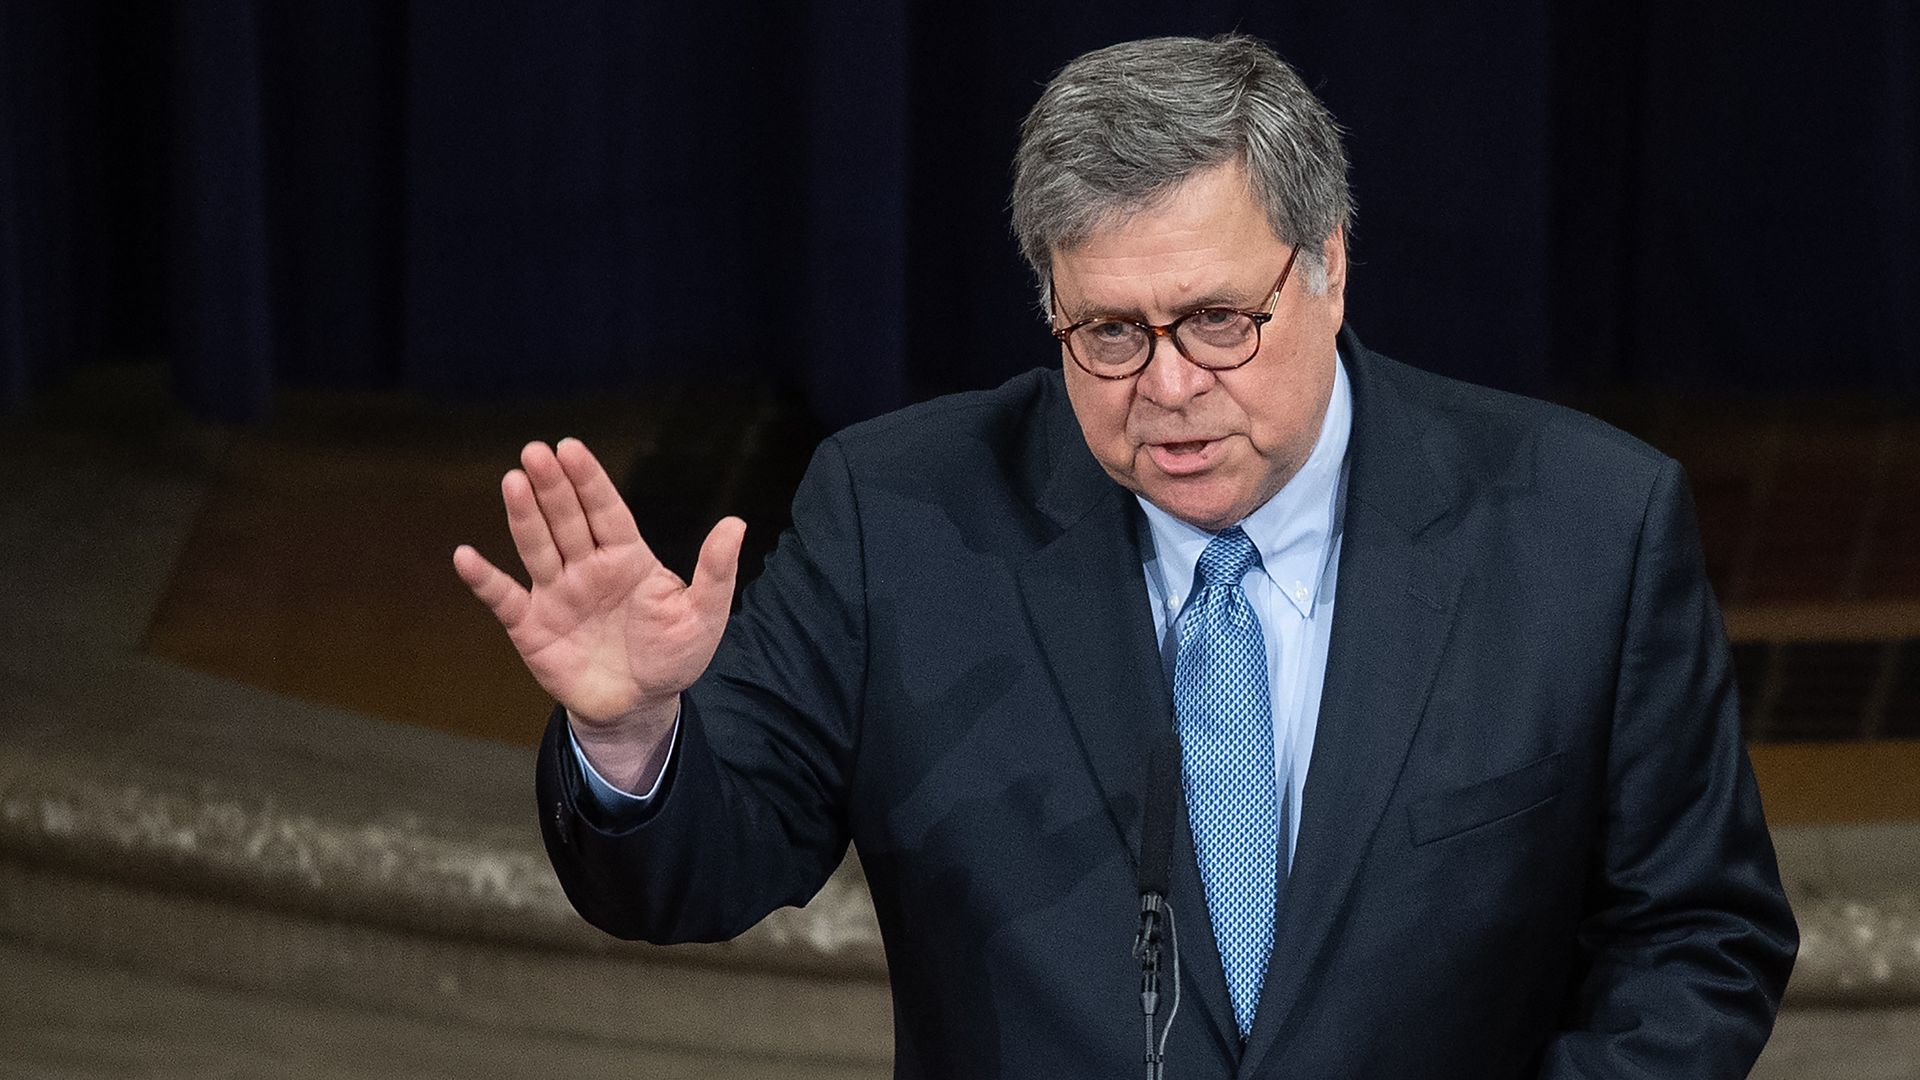 Attorney General Bill Barr waves before addressing the Department of Justice National Opioid Summit in Washington, DC, on March 6